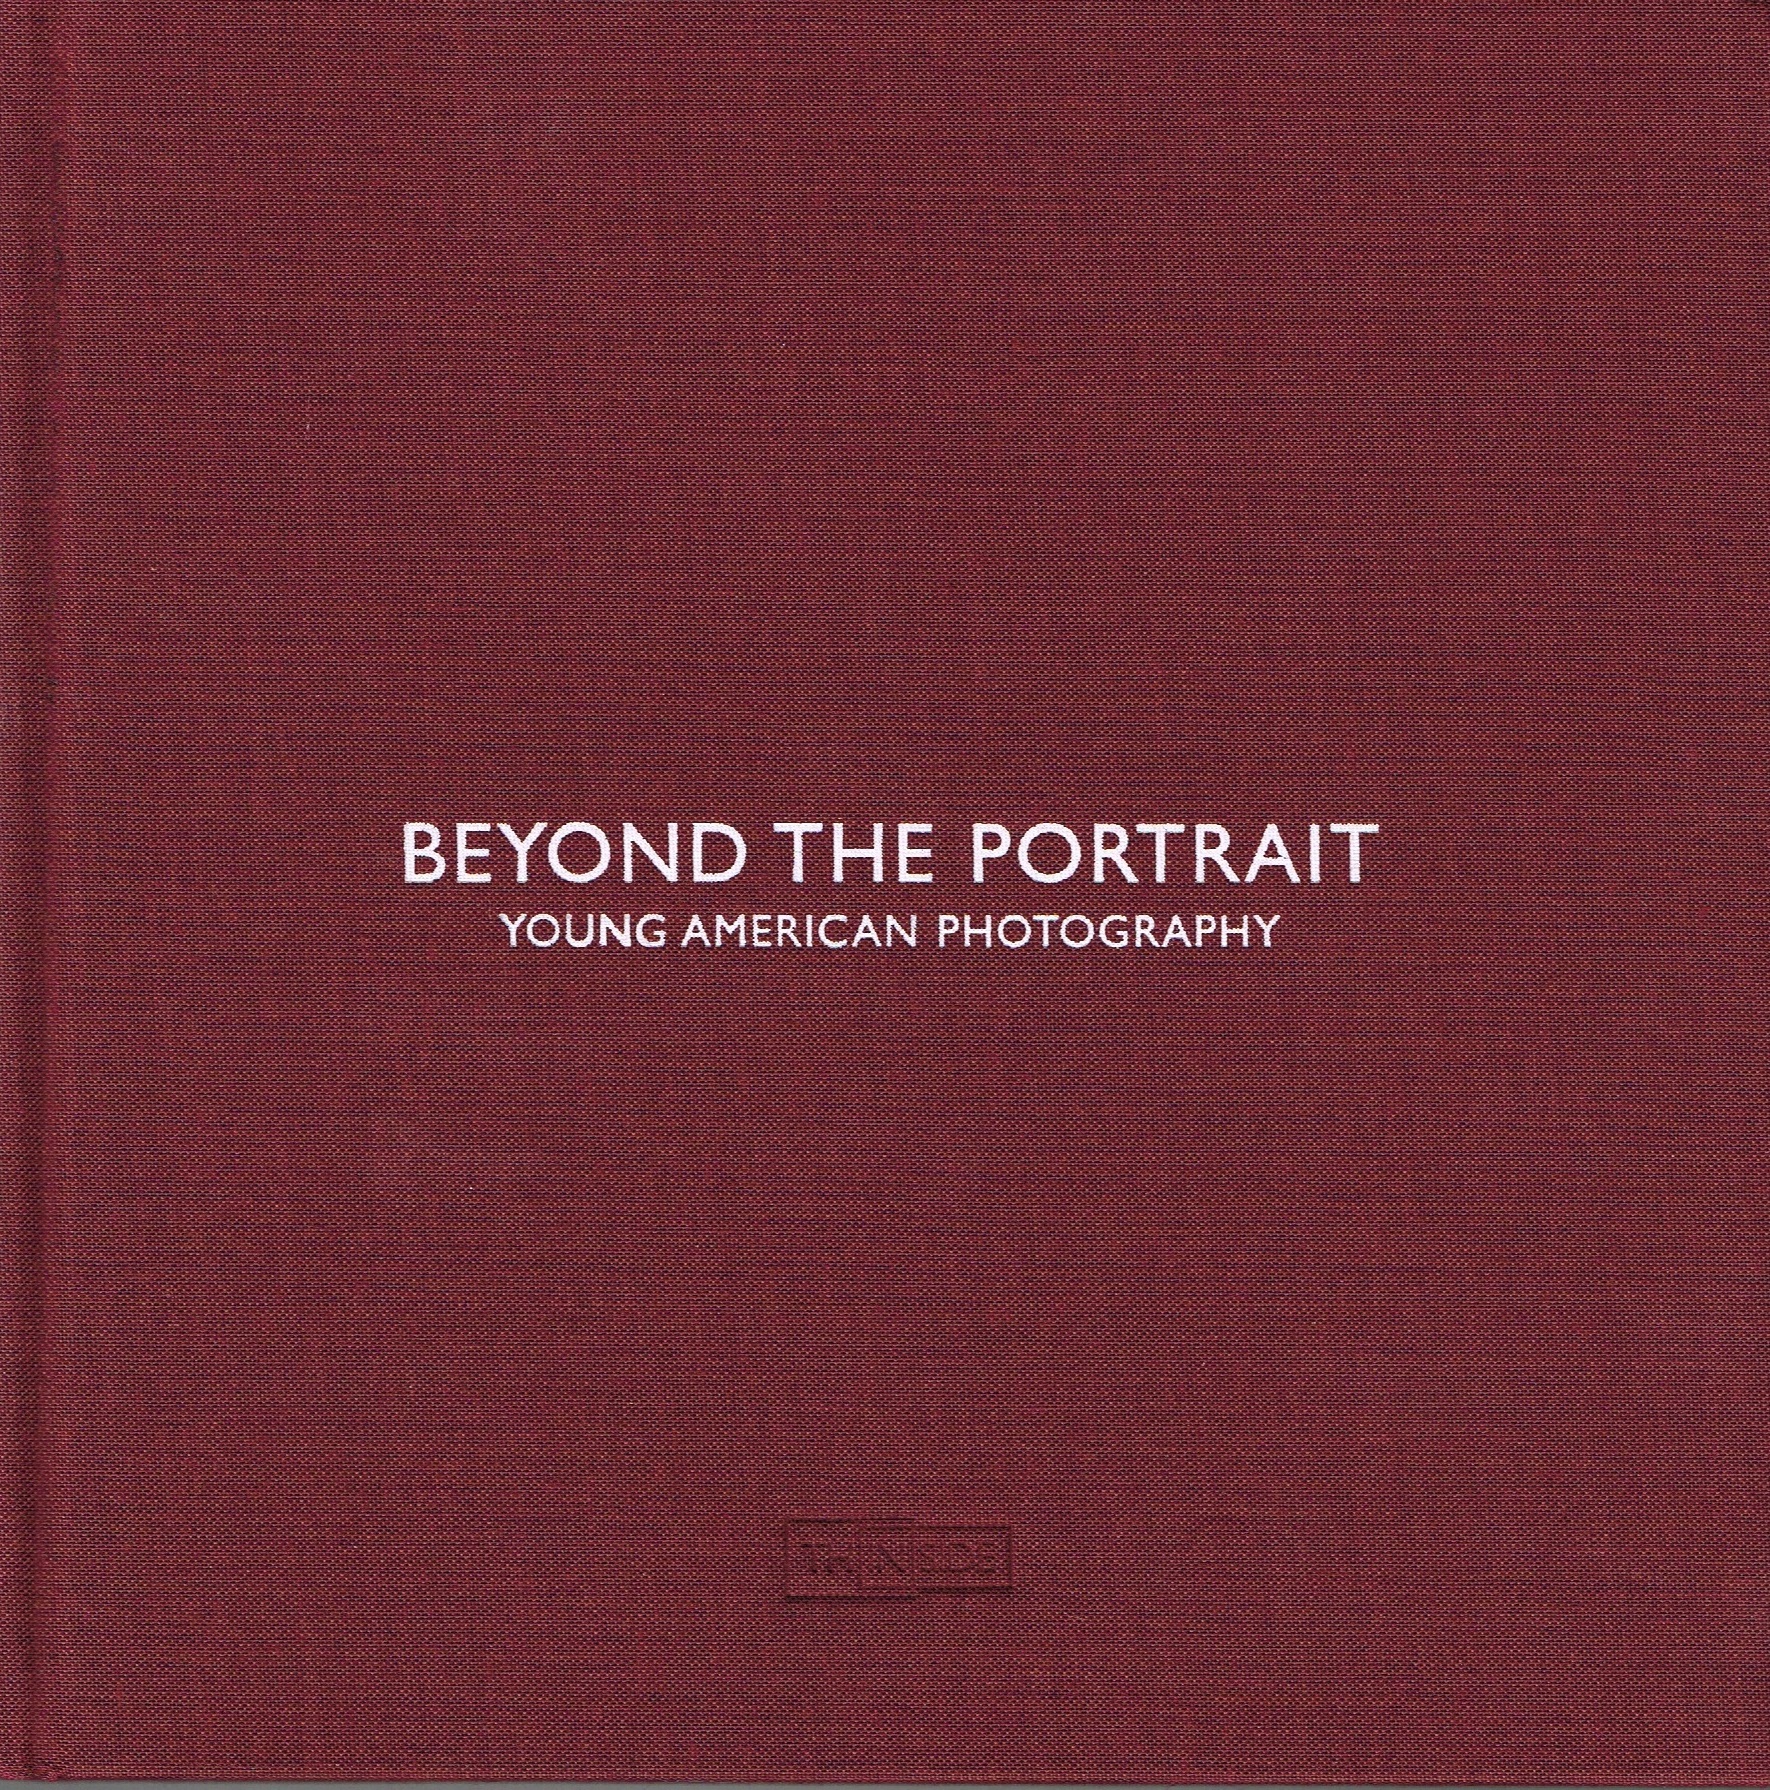 (SOTH, ALEC). Bordignon, Elena, Alec Soth, Jona Frank, Tanyth Berkeley & Alix Smith - BEYOND THE PORTRAIT: YOUNG AMERICAN PHOTOGRAPHY - SIGNED BY ALEC SOTH AND JONA FRANK